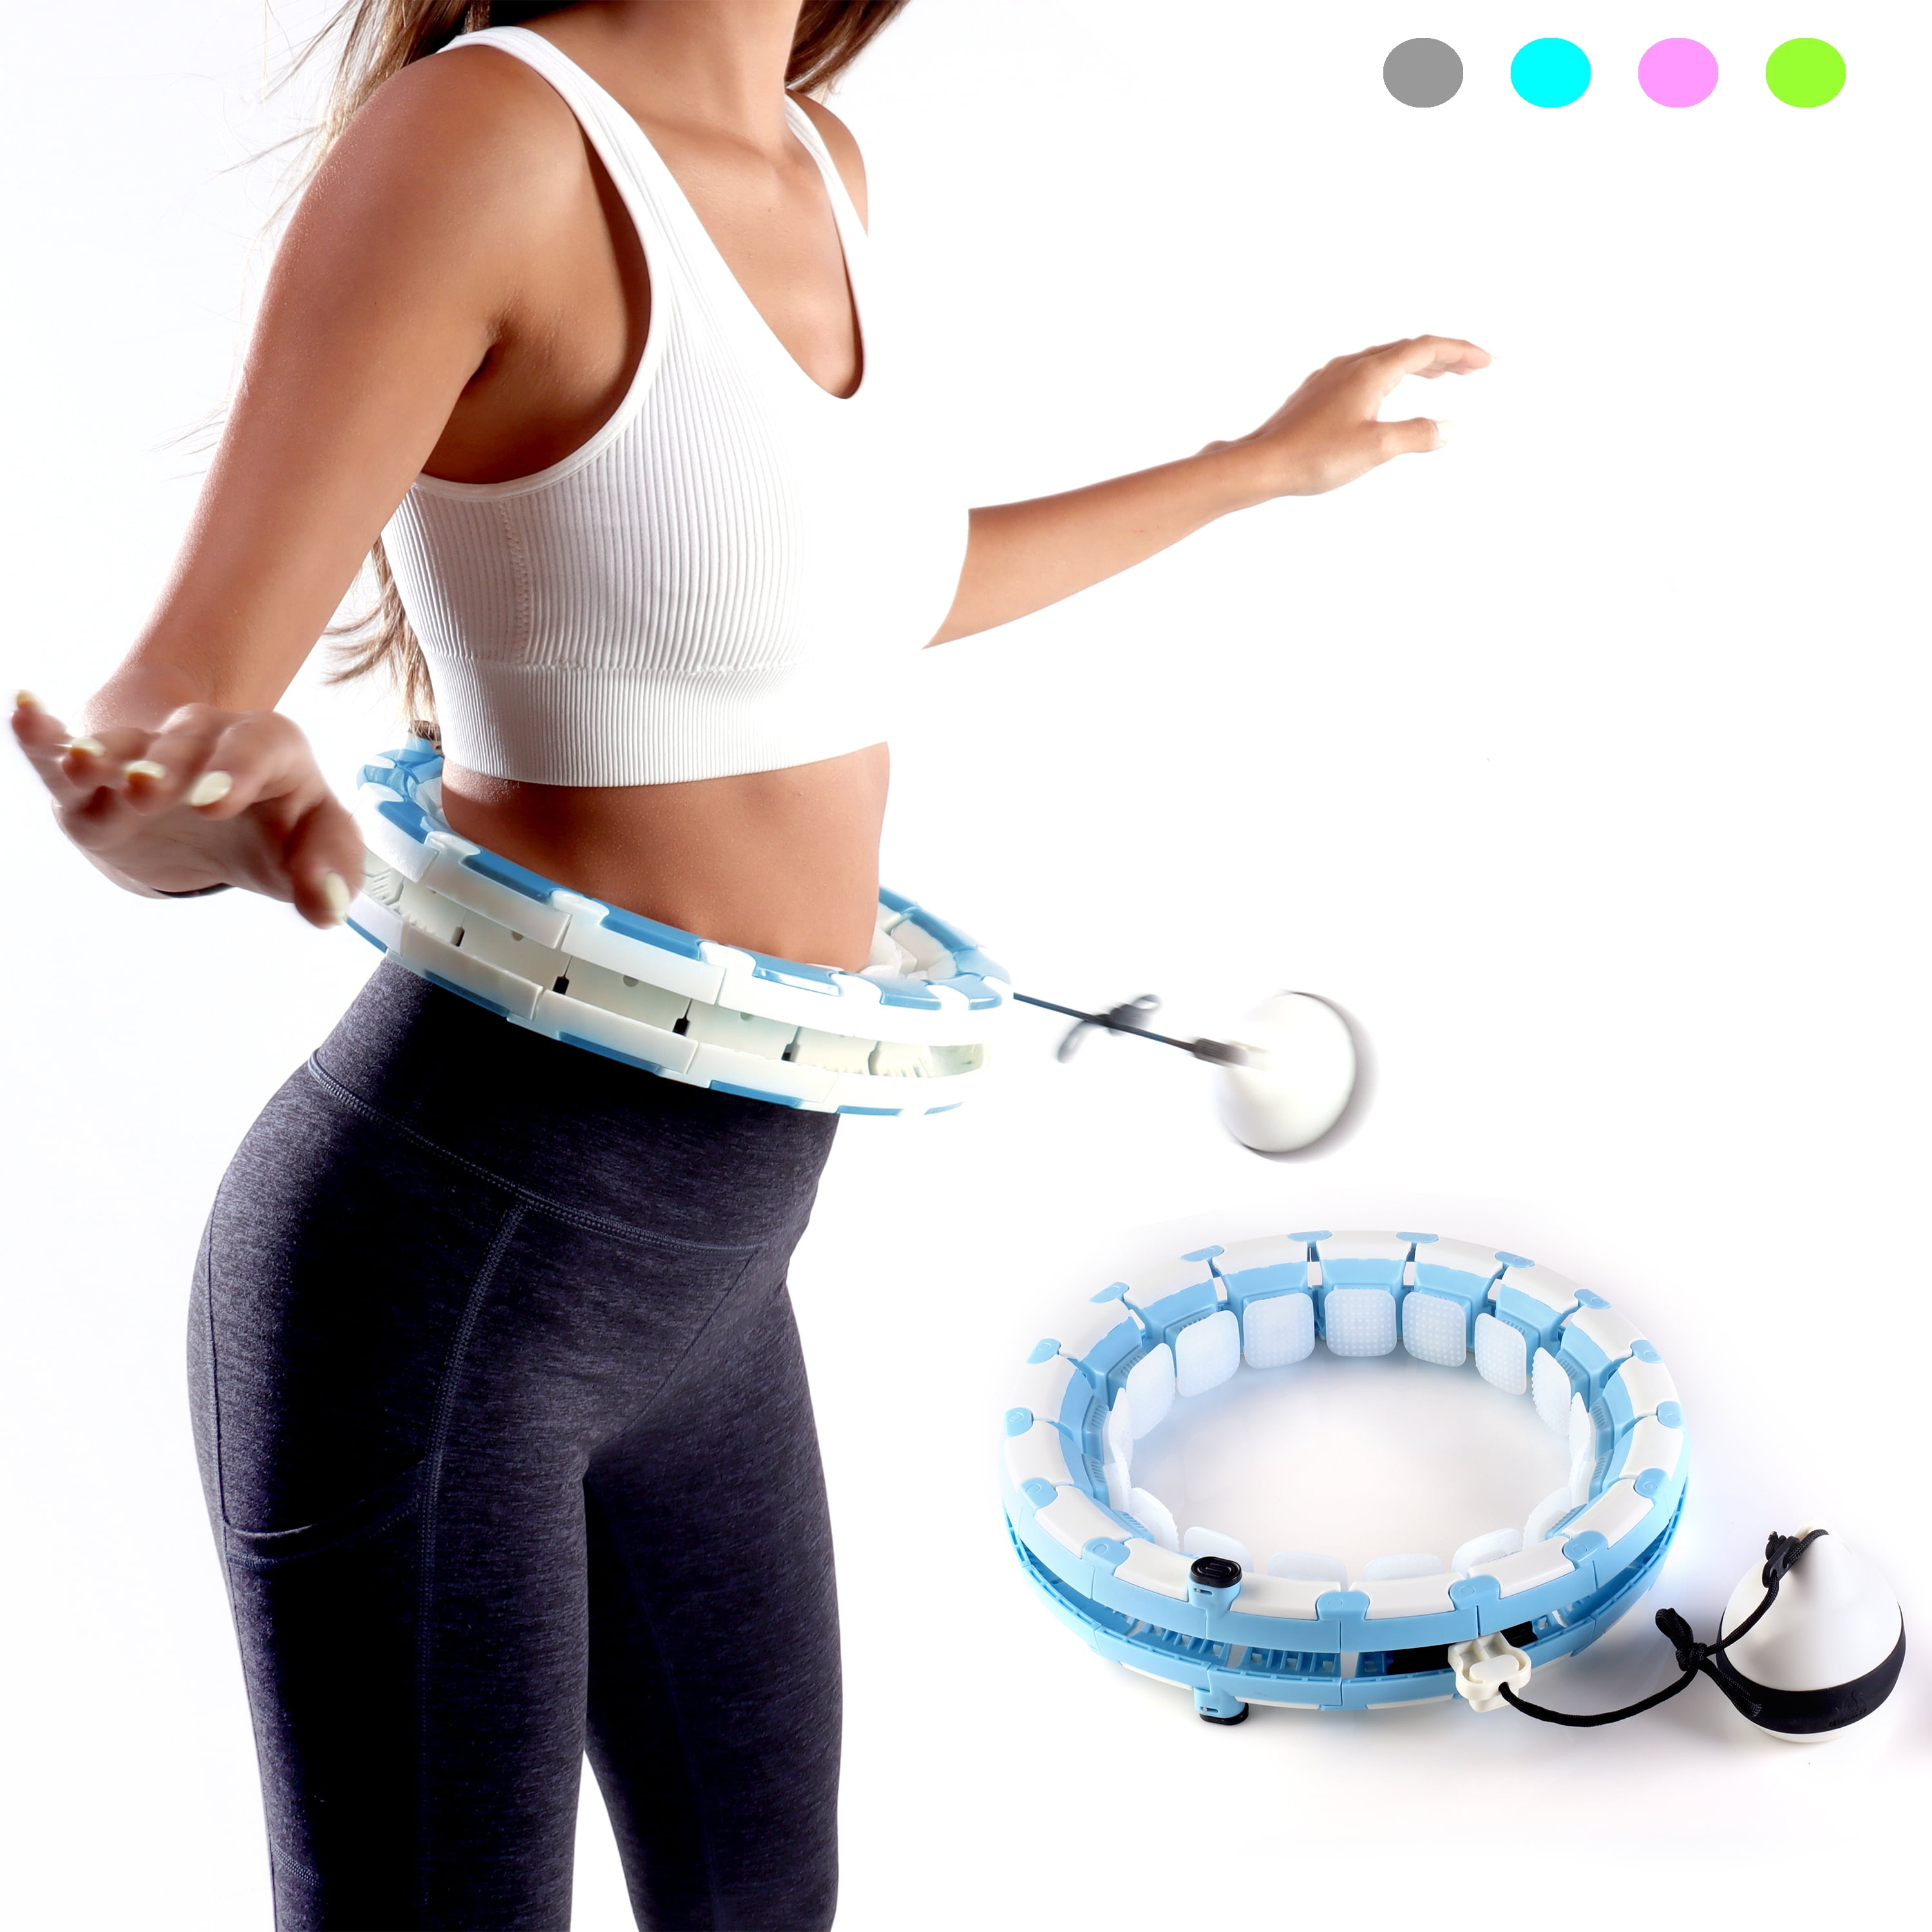 Weight Loss Exercise For Advanced Smart Workout Equipment For Fitness With Weighted Spinning Ball Waist And Belly Trainer Adjustable Plus Size Smart Hula Hoop For Adults 